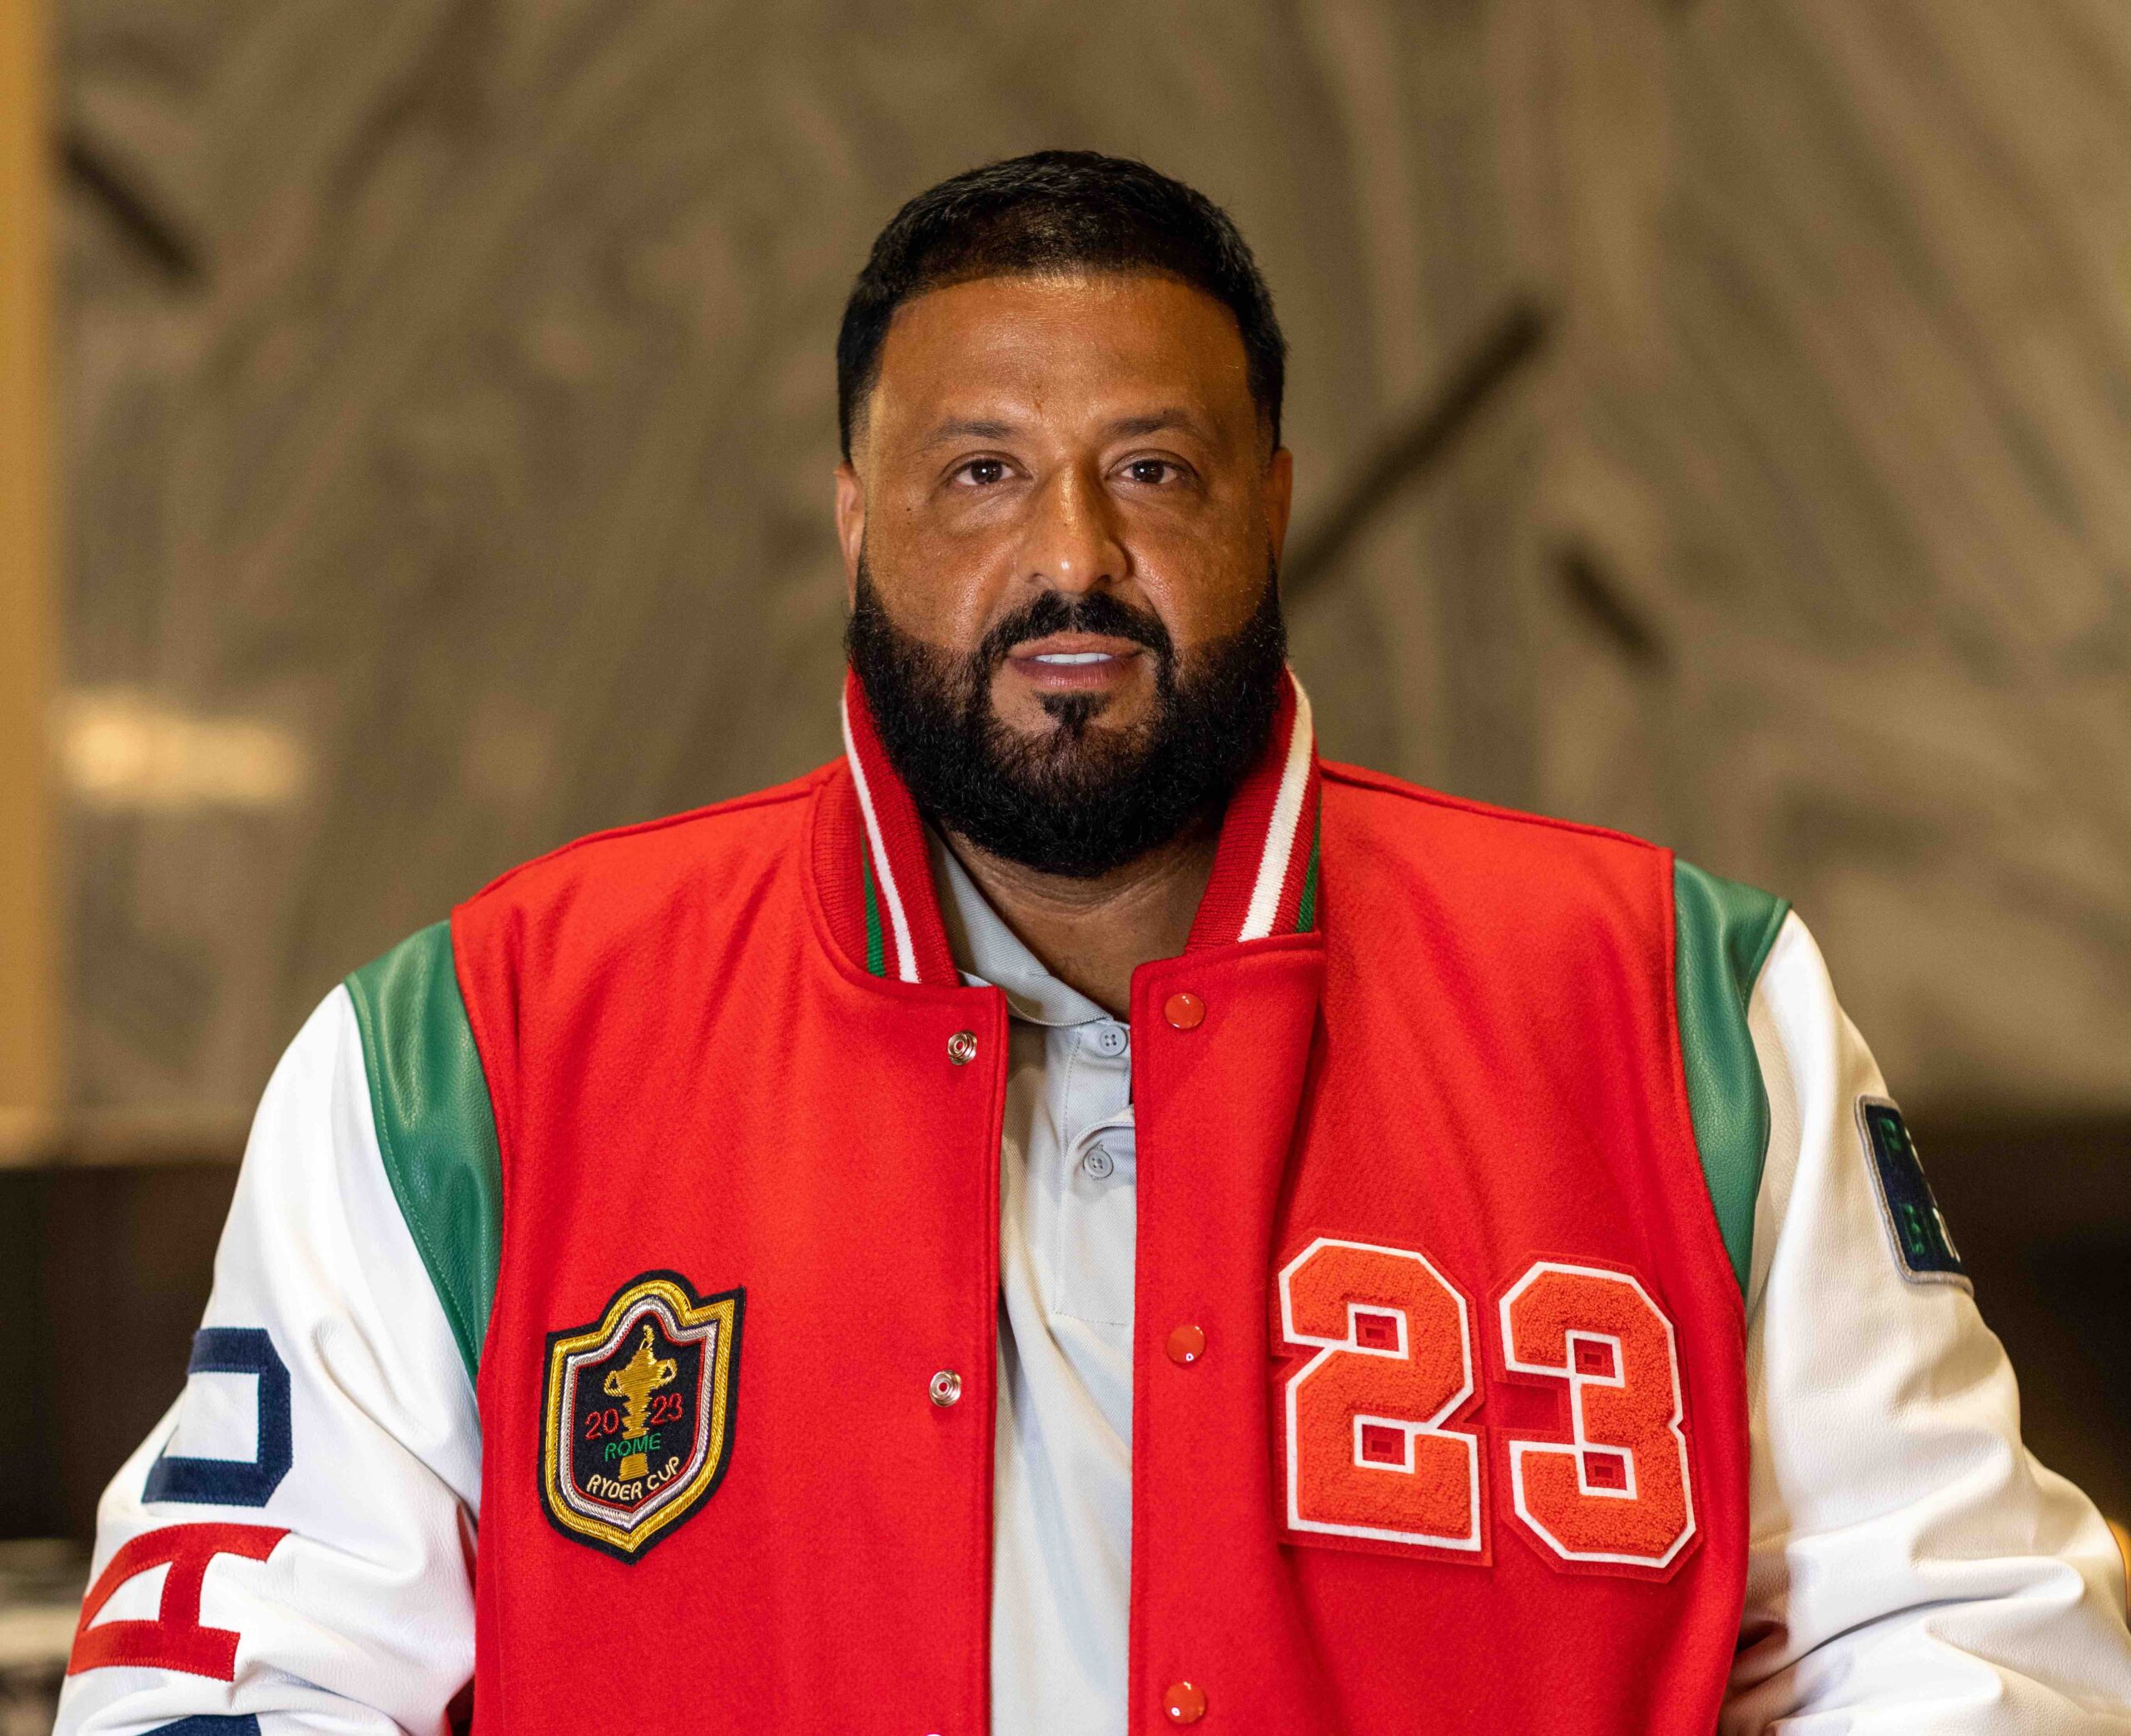 DJ Khaled will be among the Roc Nation talent who will be working on the Ryder Cup collaboration